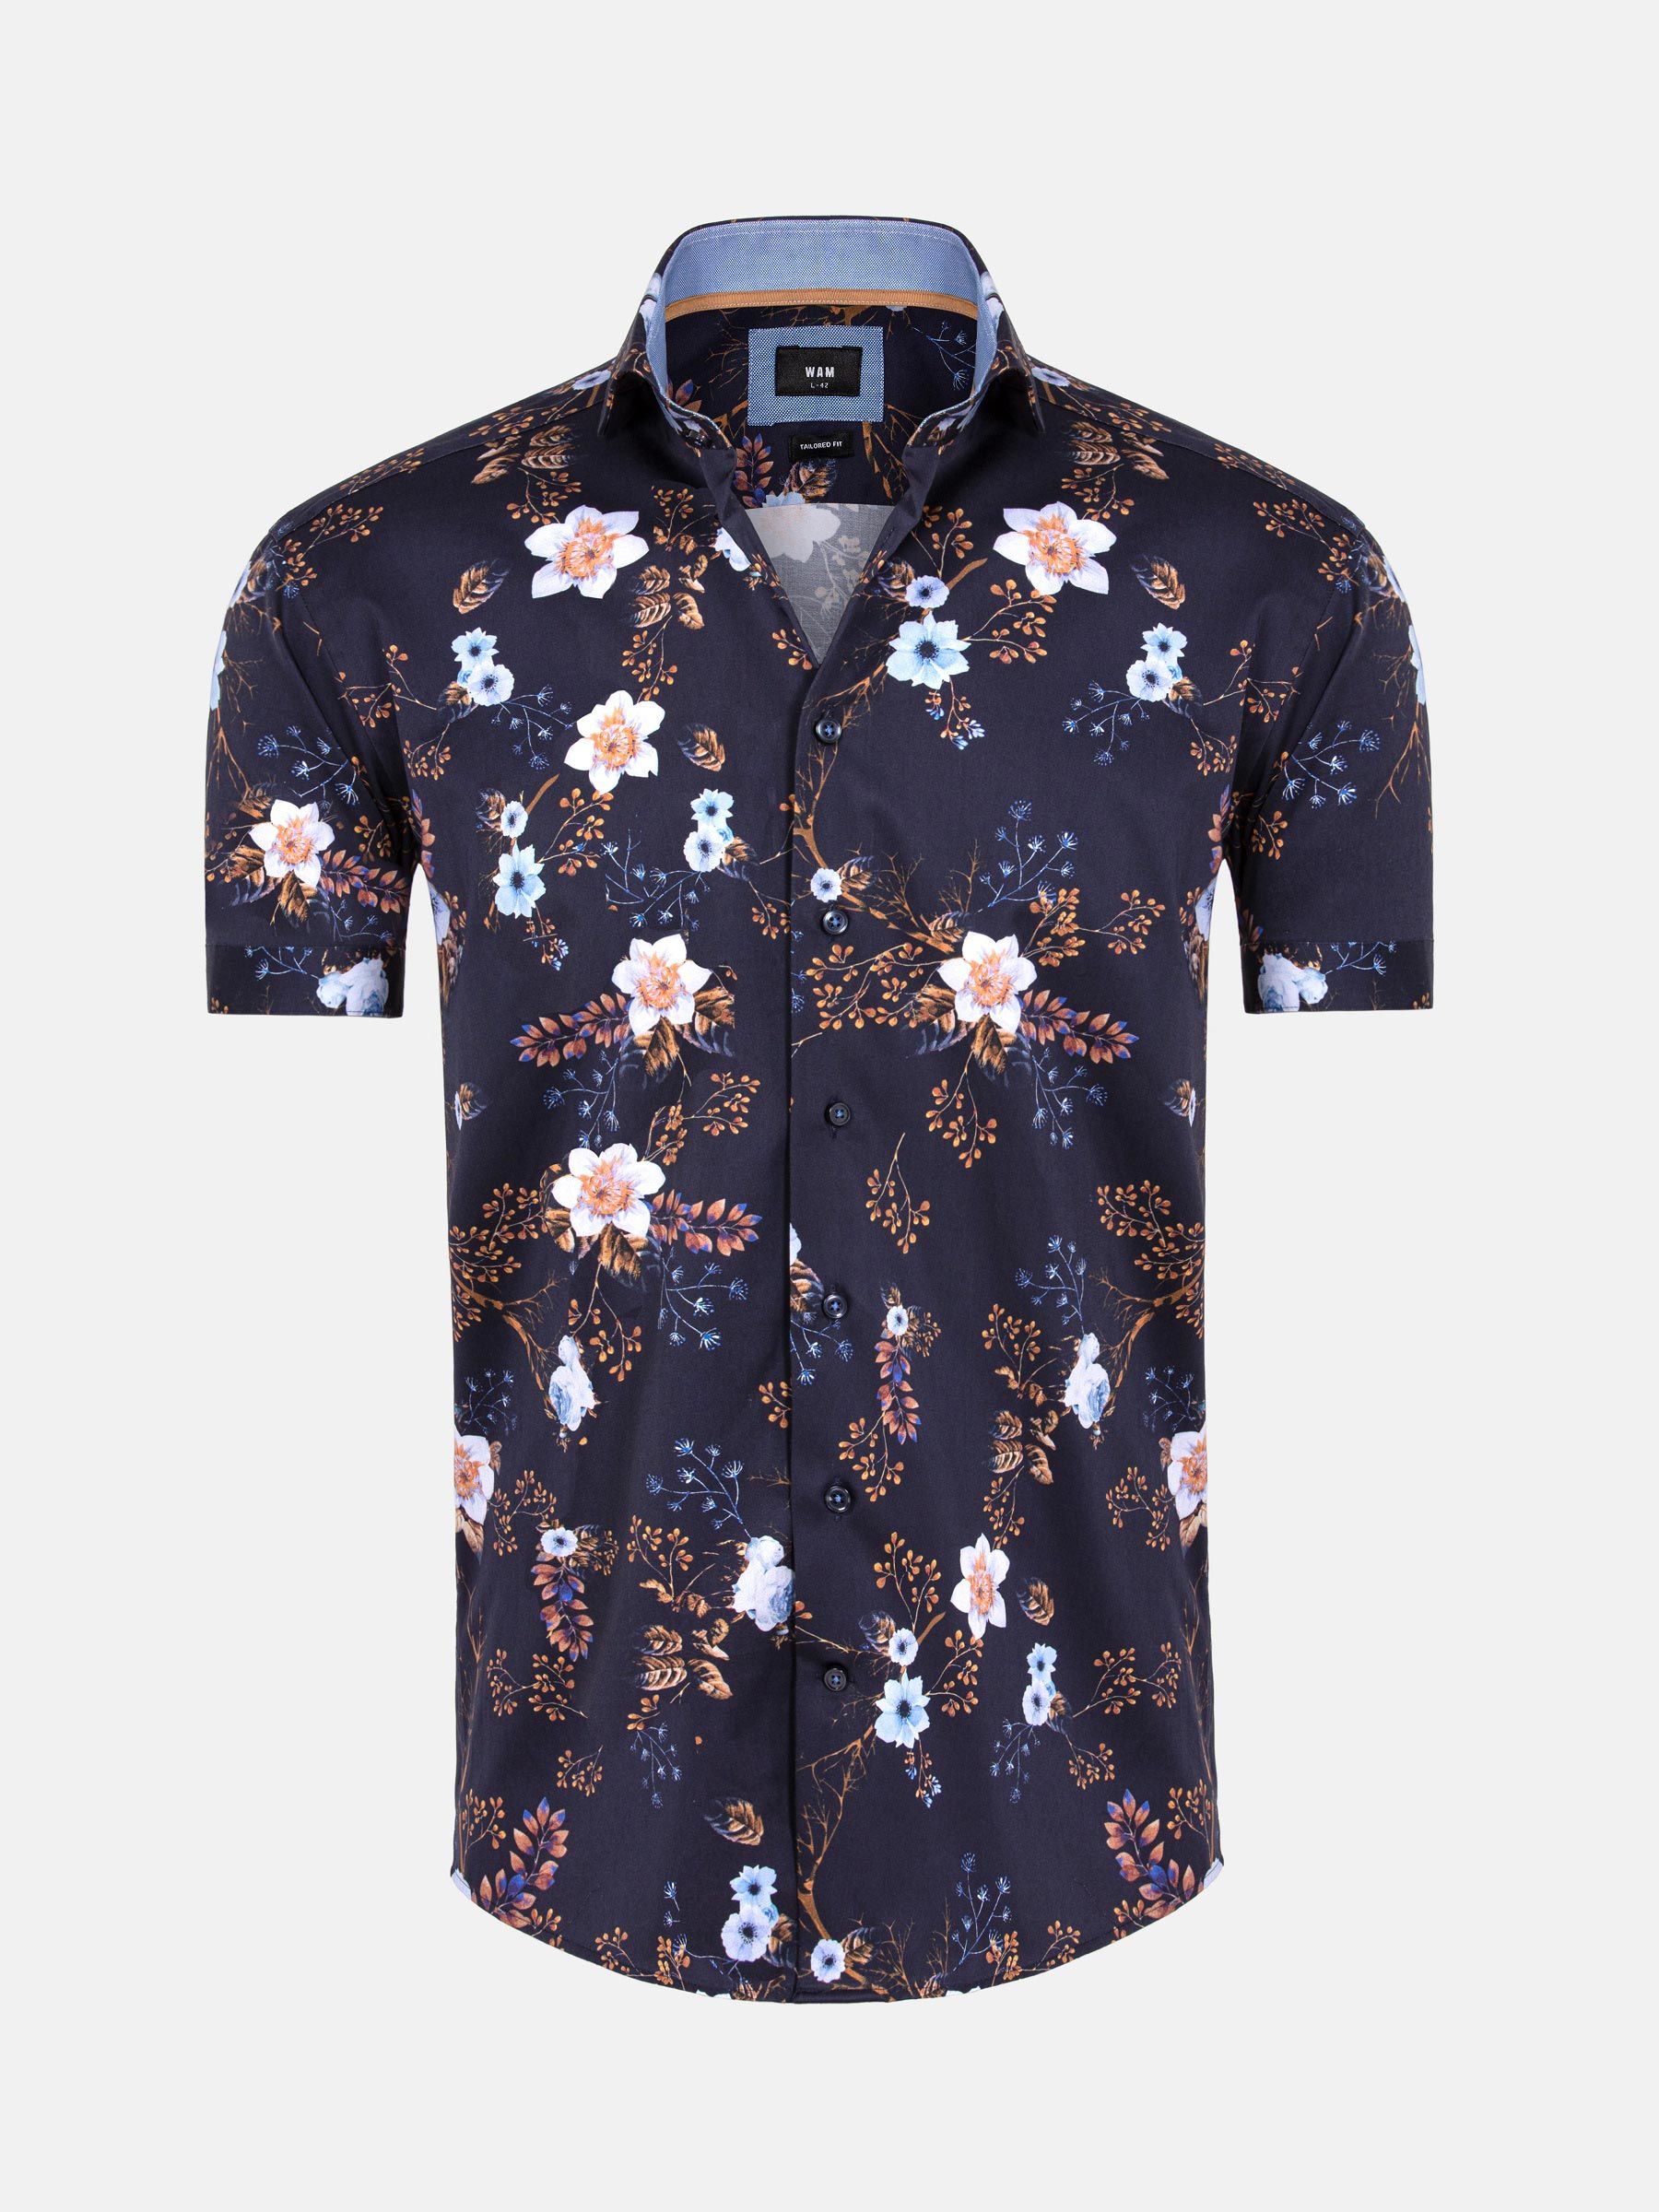 Light Grey Floral Mens Short Sleeve Button up Shirts - Tailored